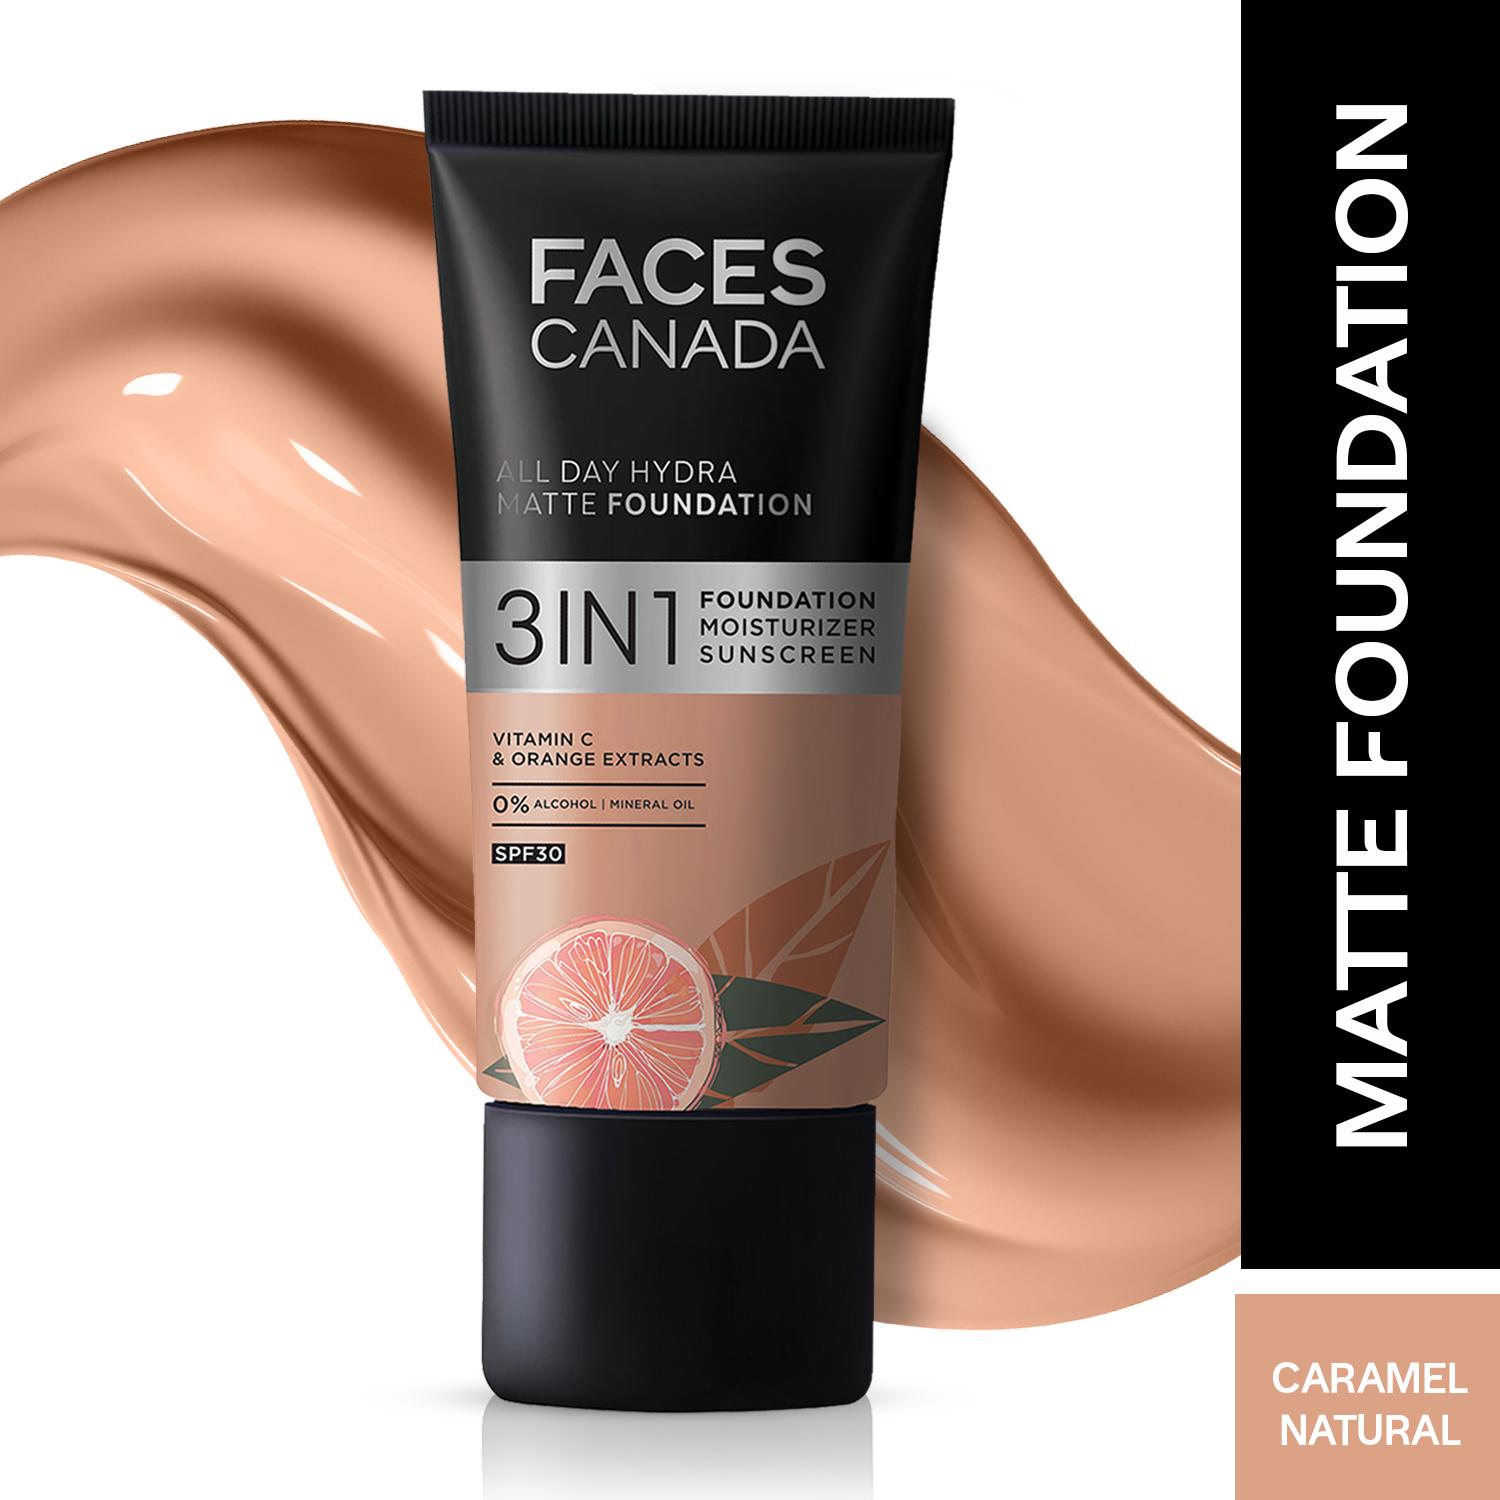 Faces Canada | Faces Canada 3in1 All Day Hydra Matte Foundation + Moisturizer + SPF 30 - Caramel Natural 023 (25 ml)